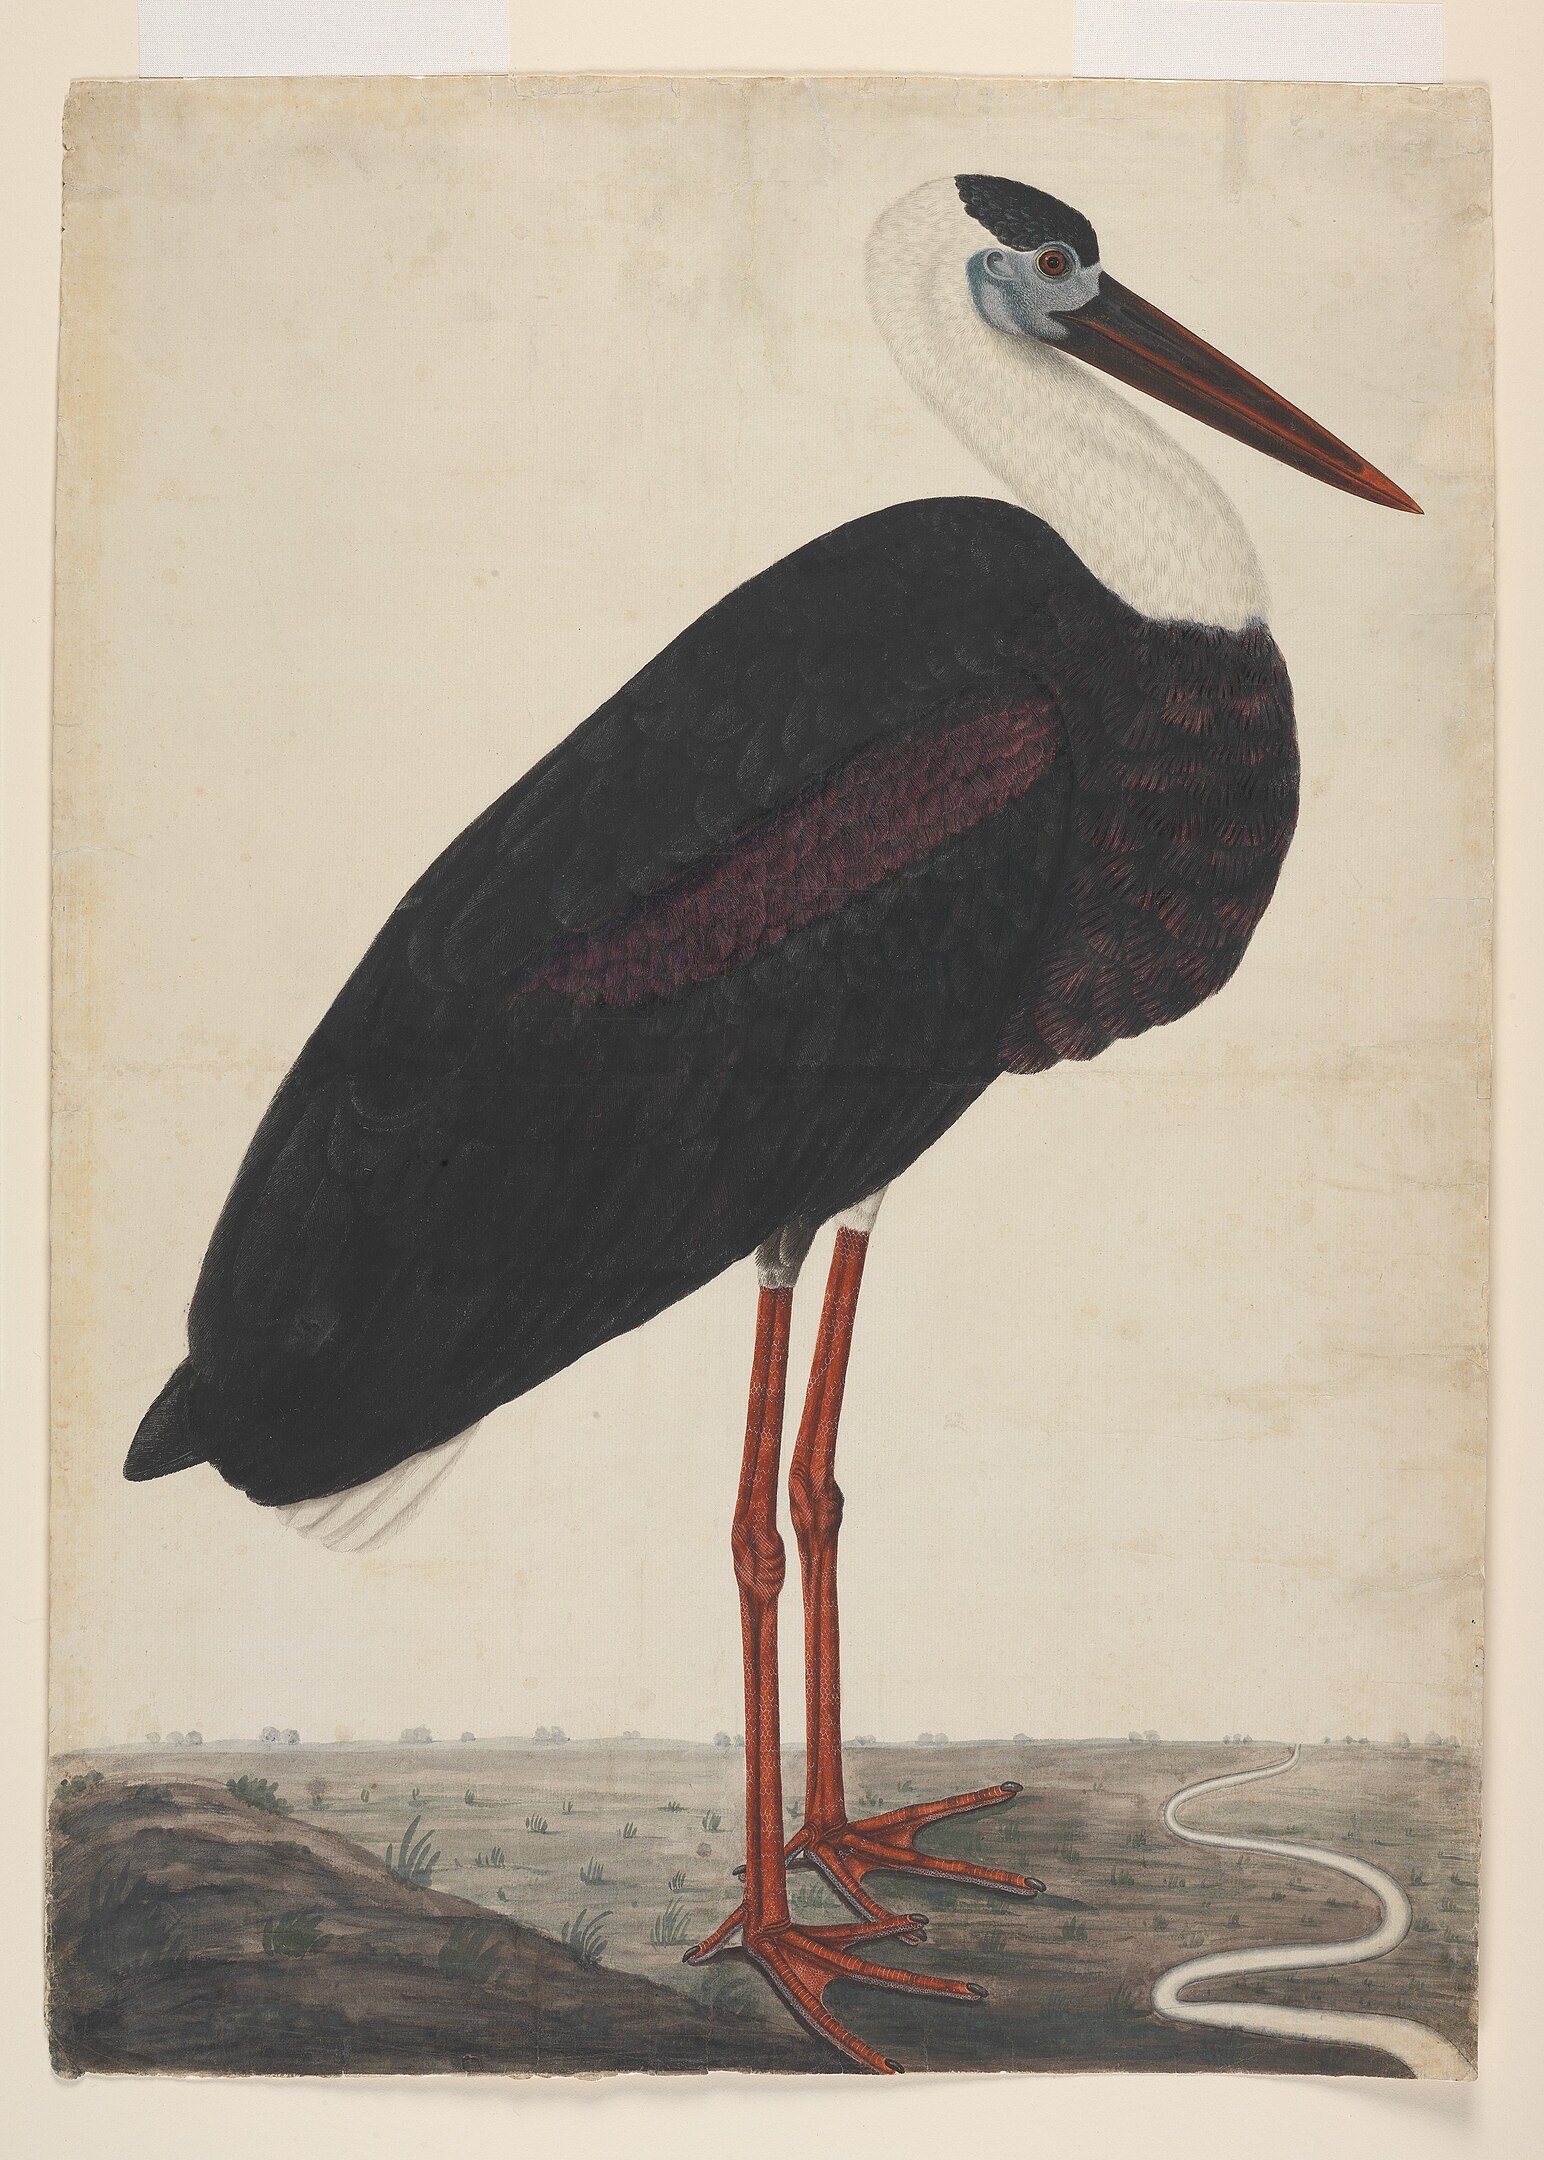 A stork in a landscape